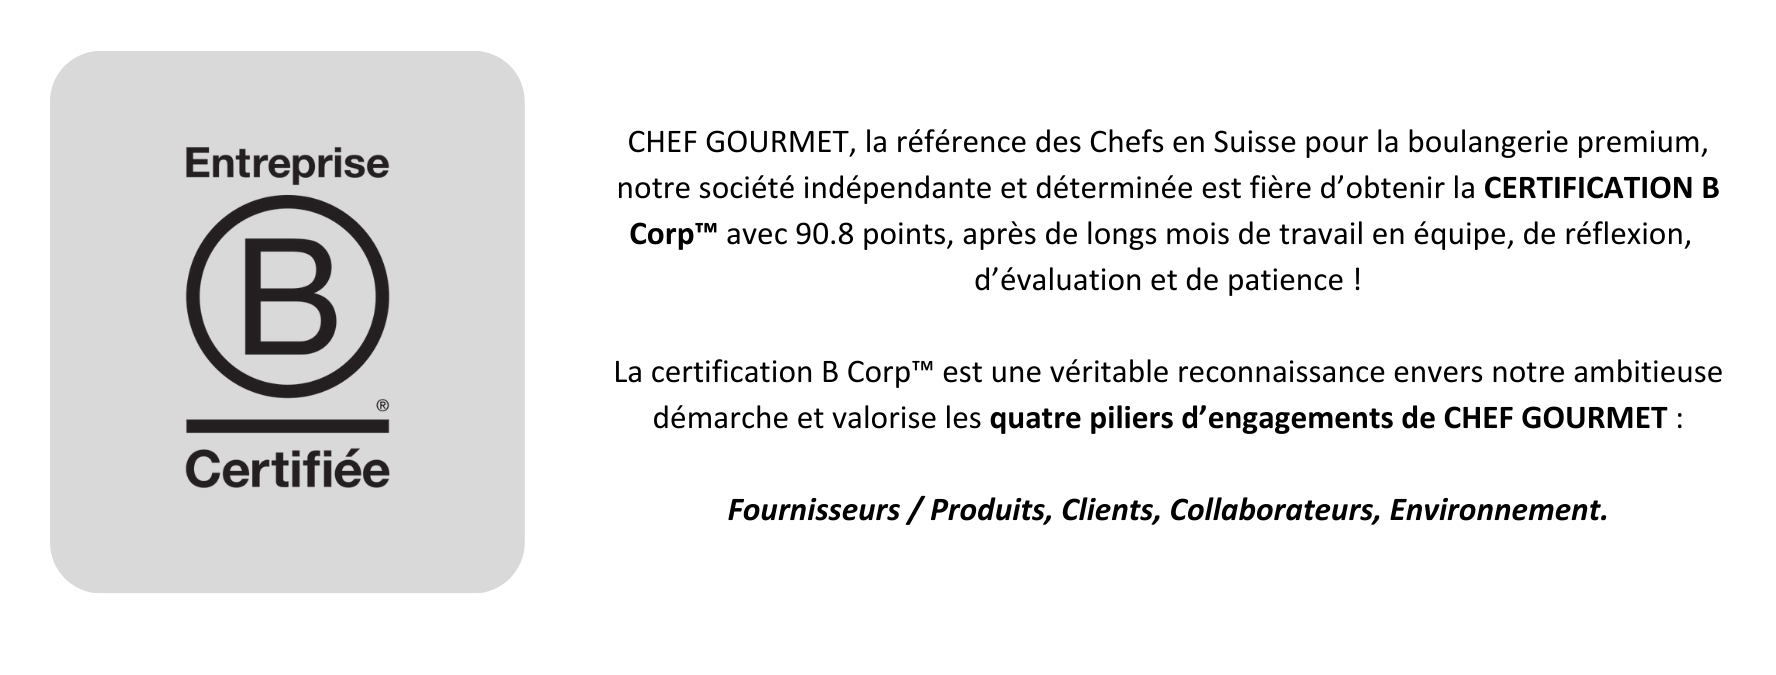 Bcorp Chef Gourmet